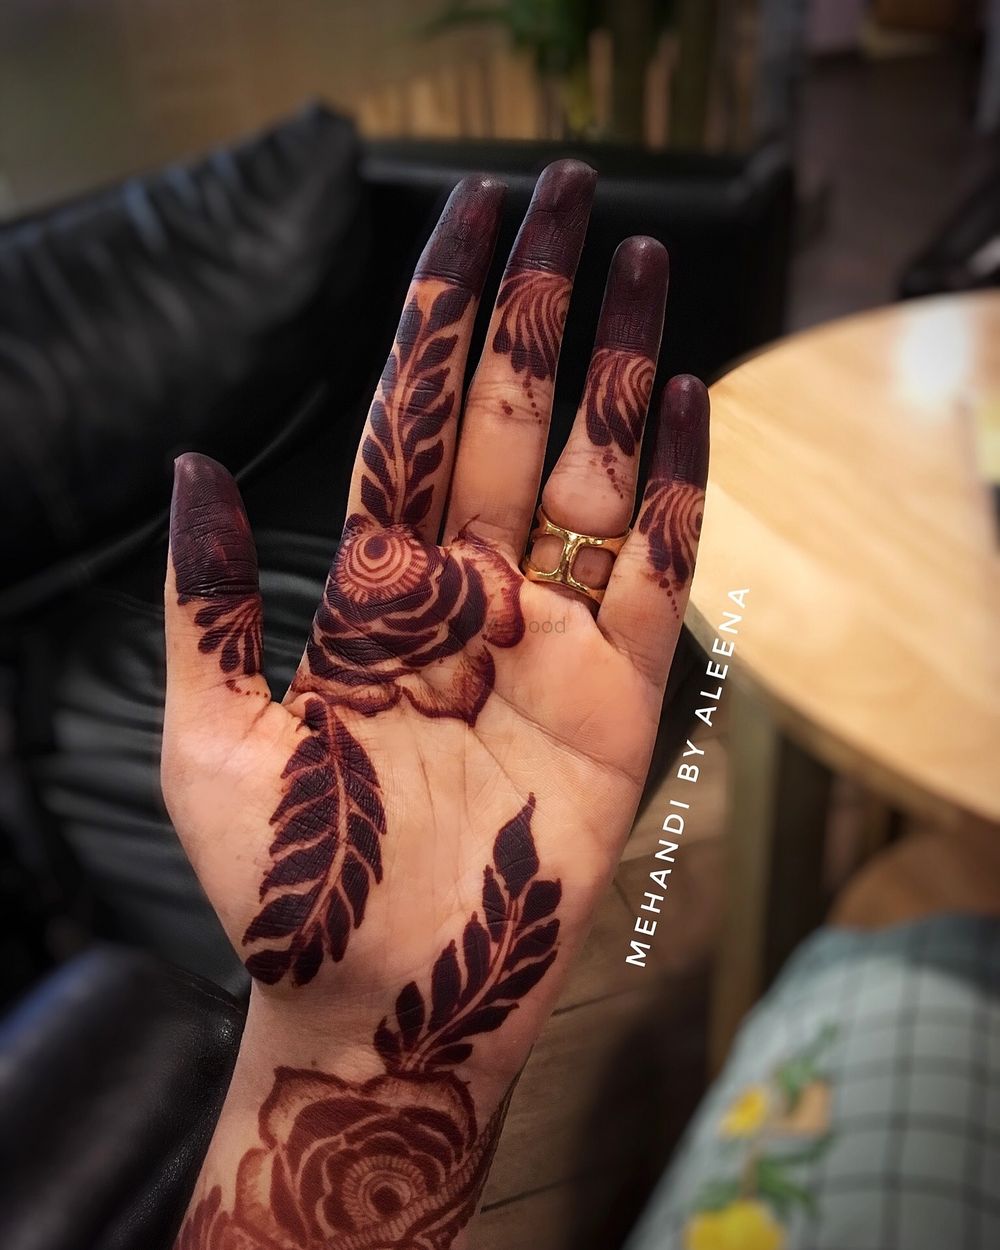 Photo From Indian and Arabic Party Henna Designs - By Mehandi by Aleena